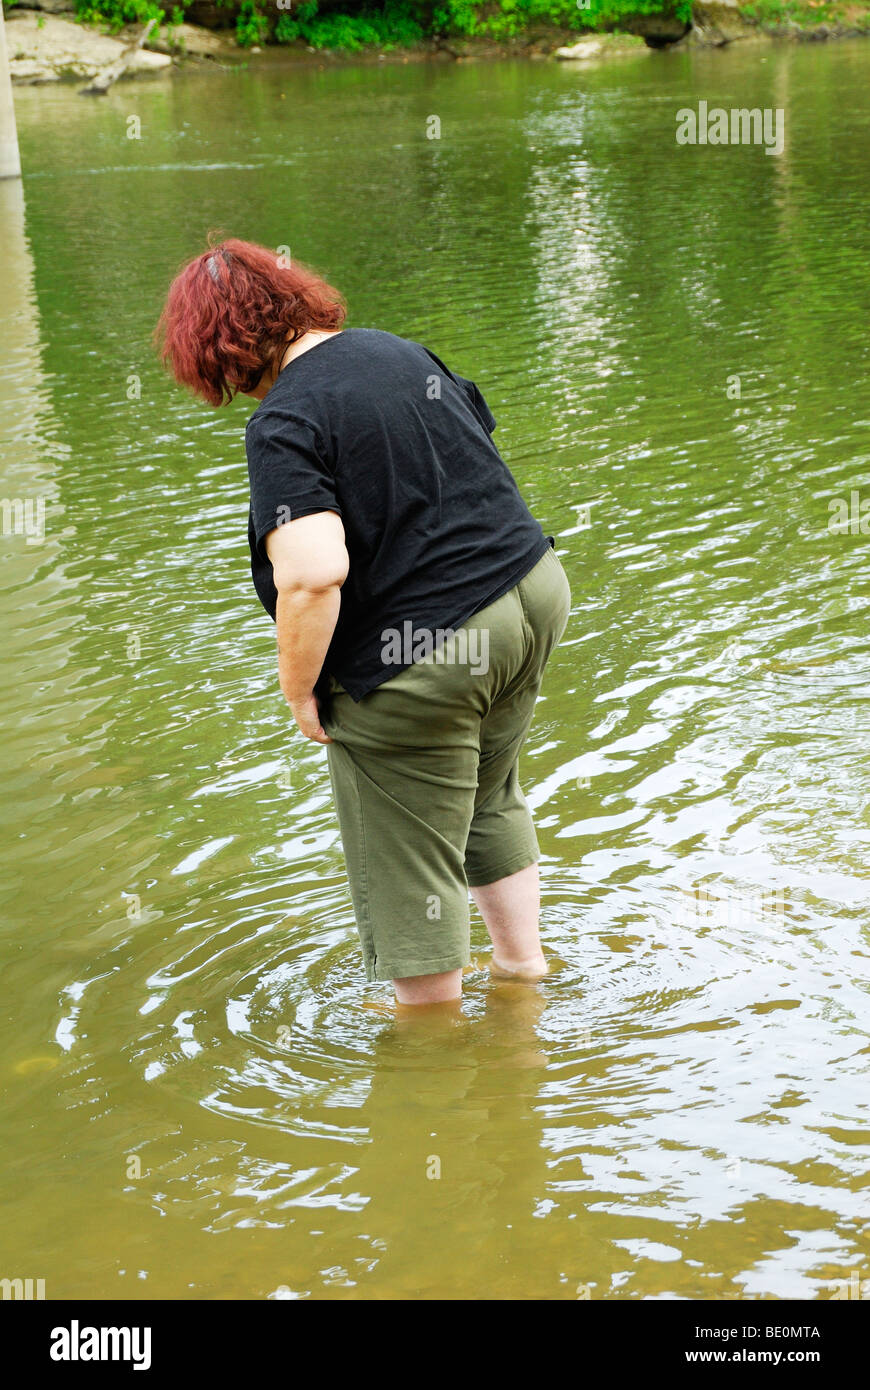 woman wading in the licking river in Zanesville ohio Stock Photo